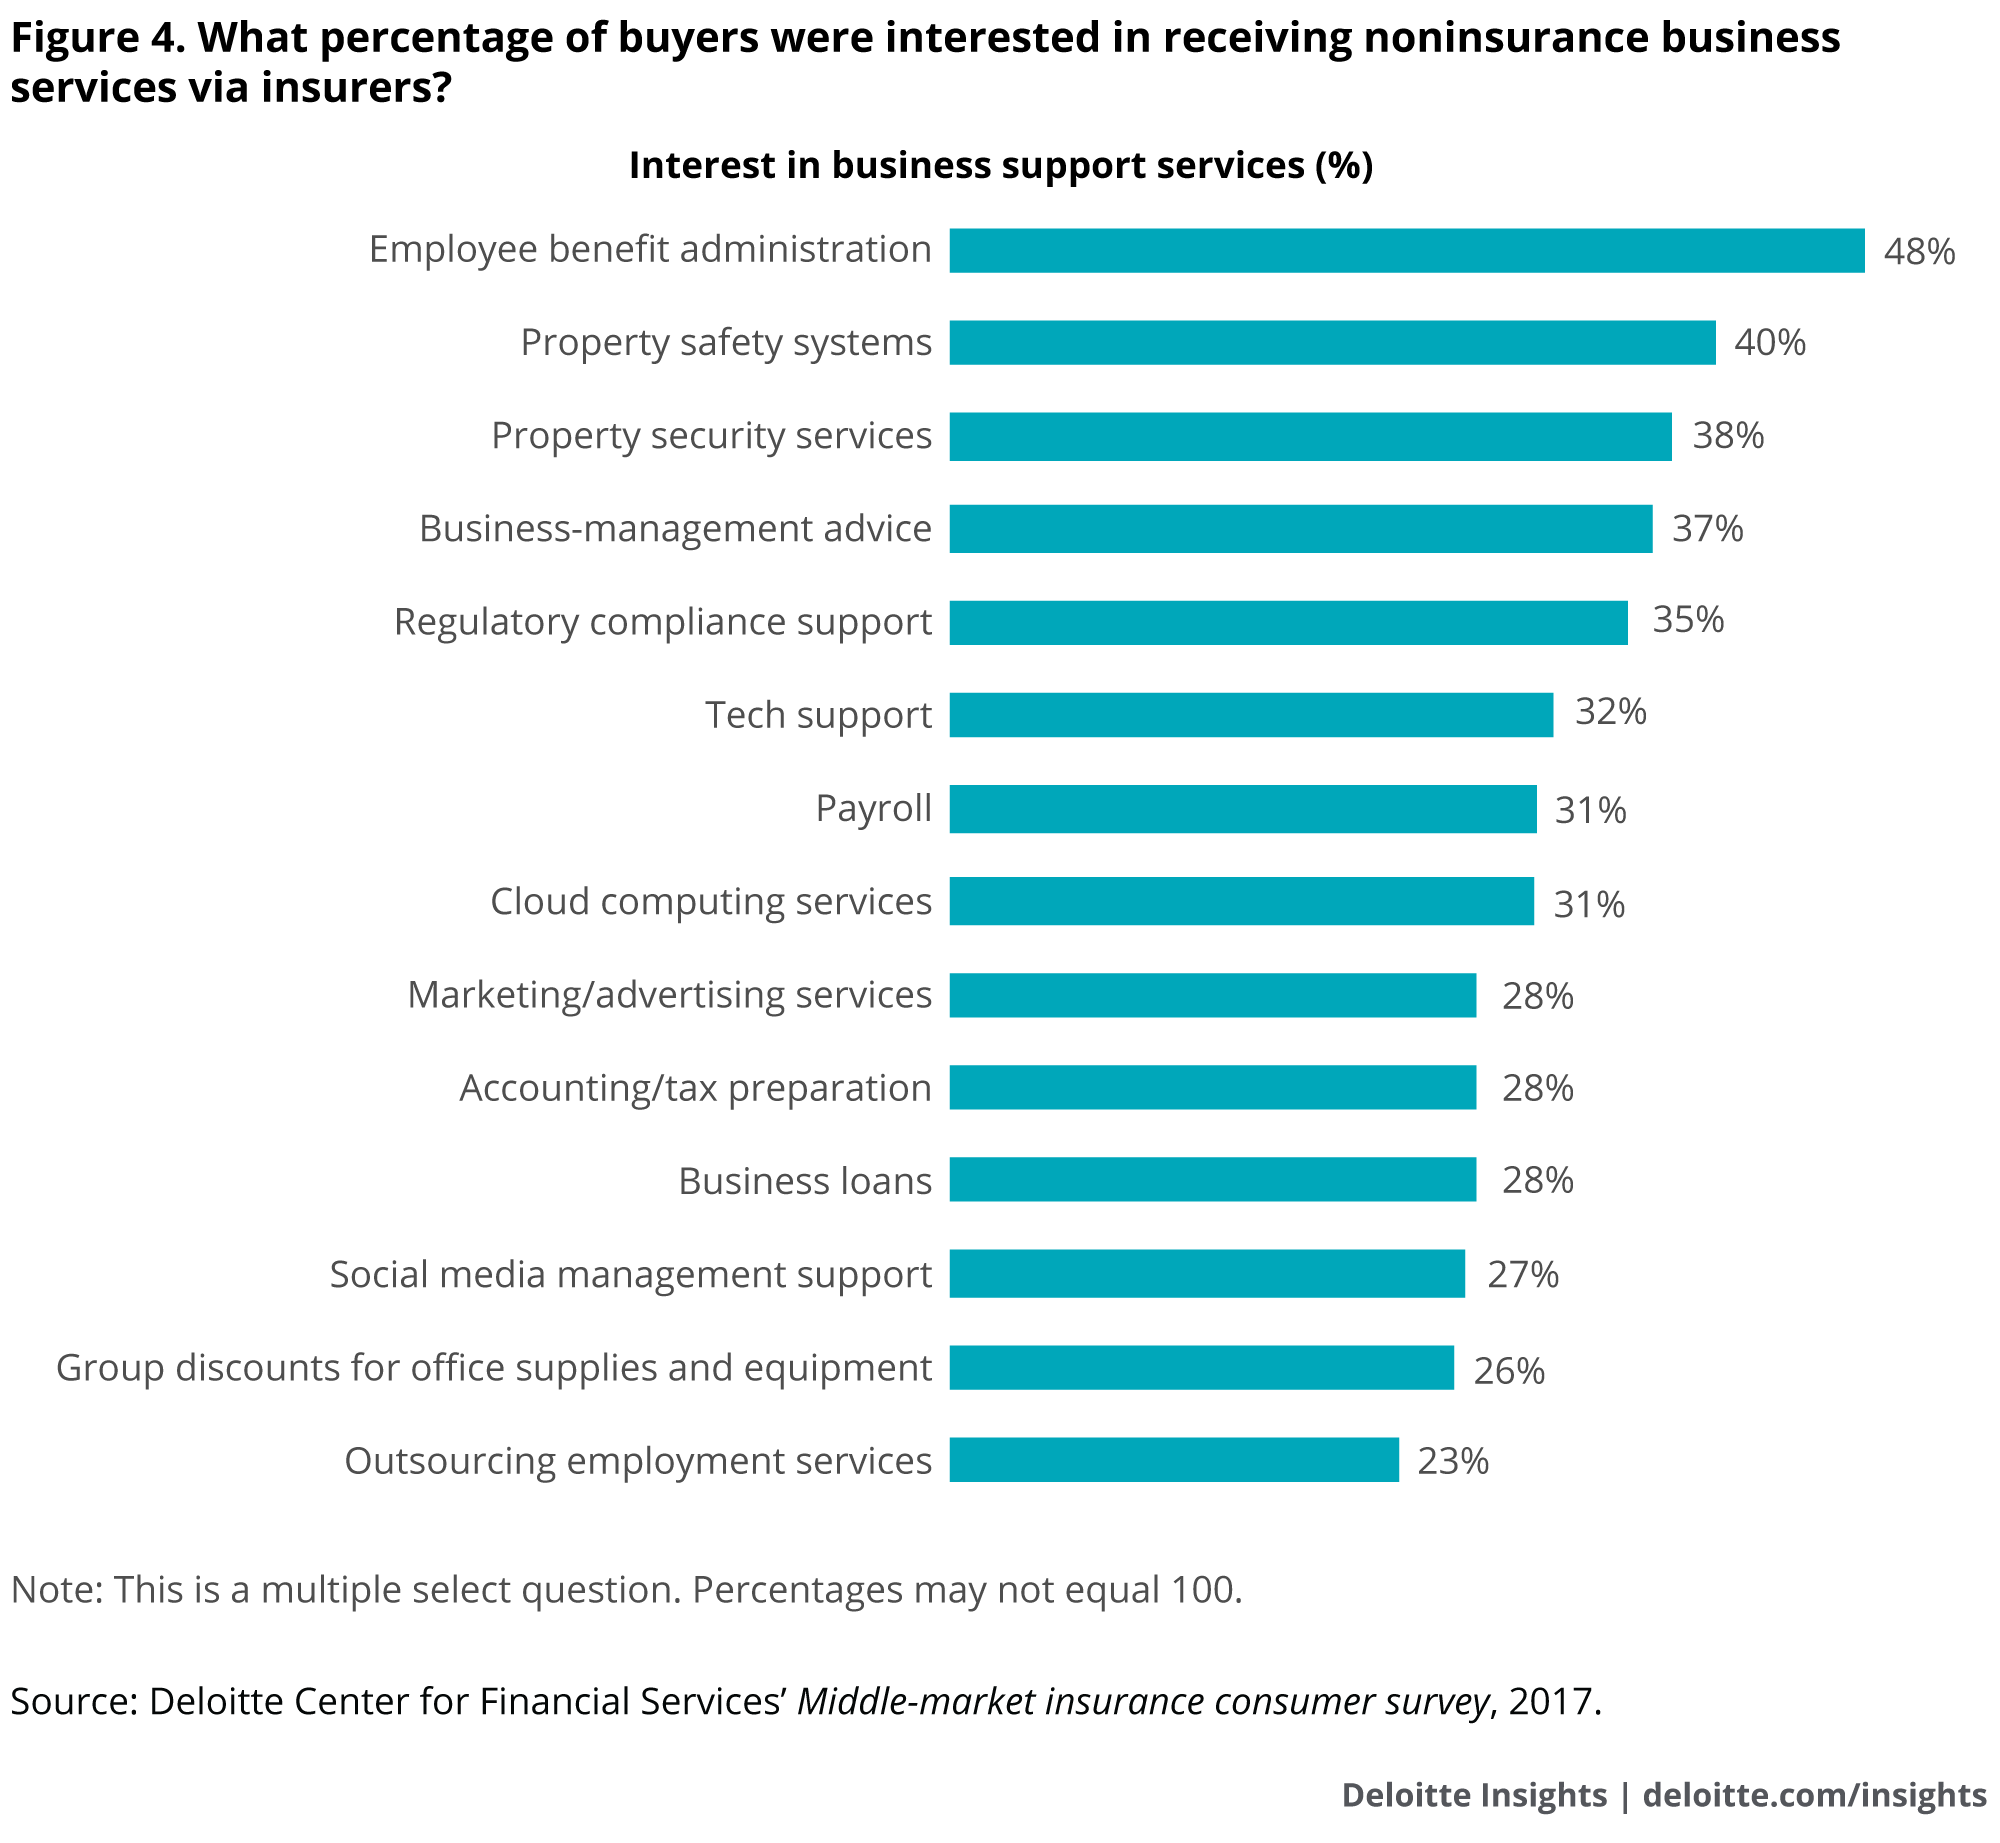 What percentage of buyers were interested in receiving noninsurance business services via insurers?